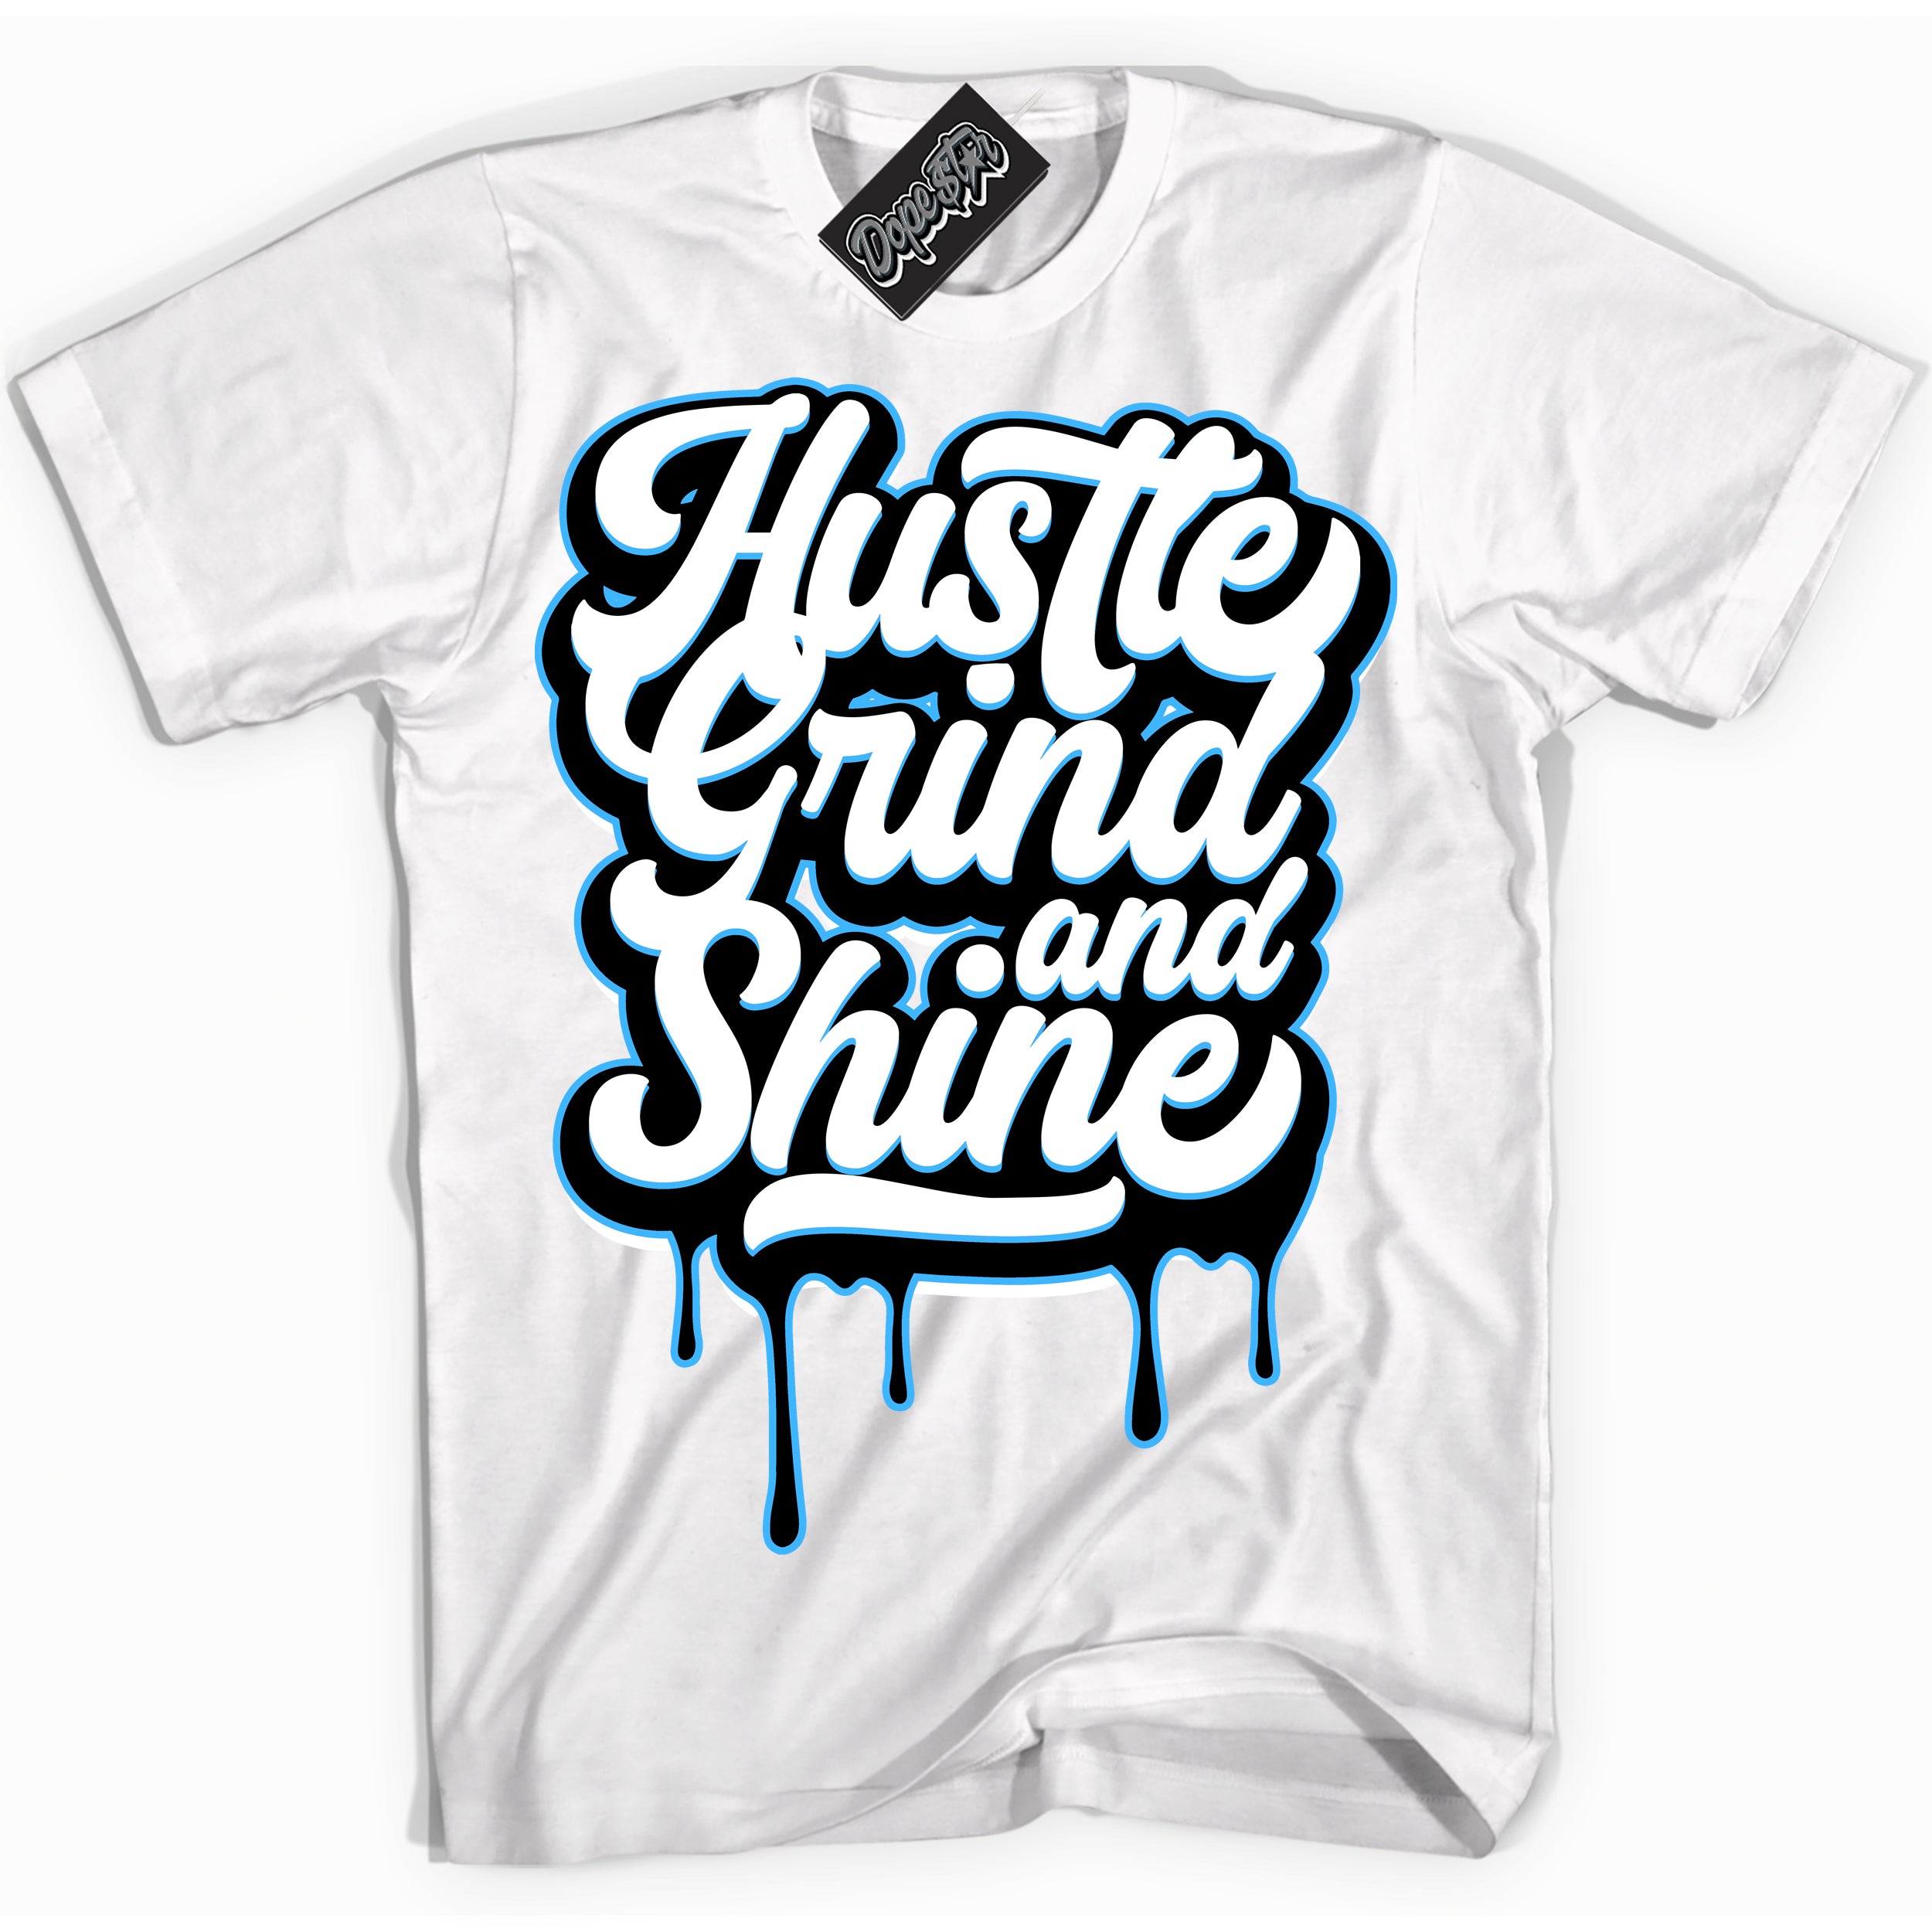 Cool White graphic tee with “ Hustle Grind ” design, that perfectly matches Powder Blue 9s sneakers 